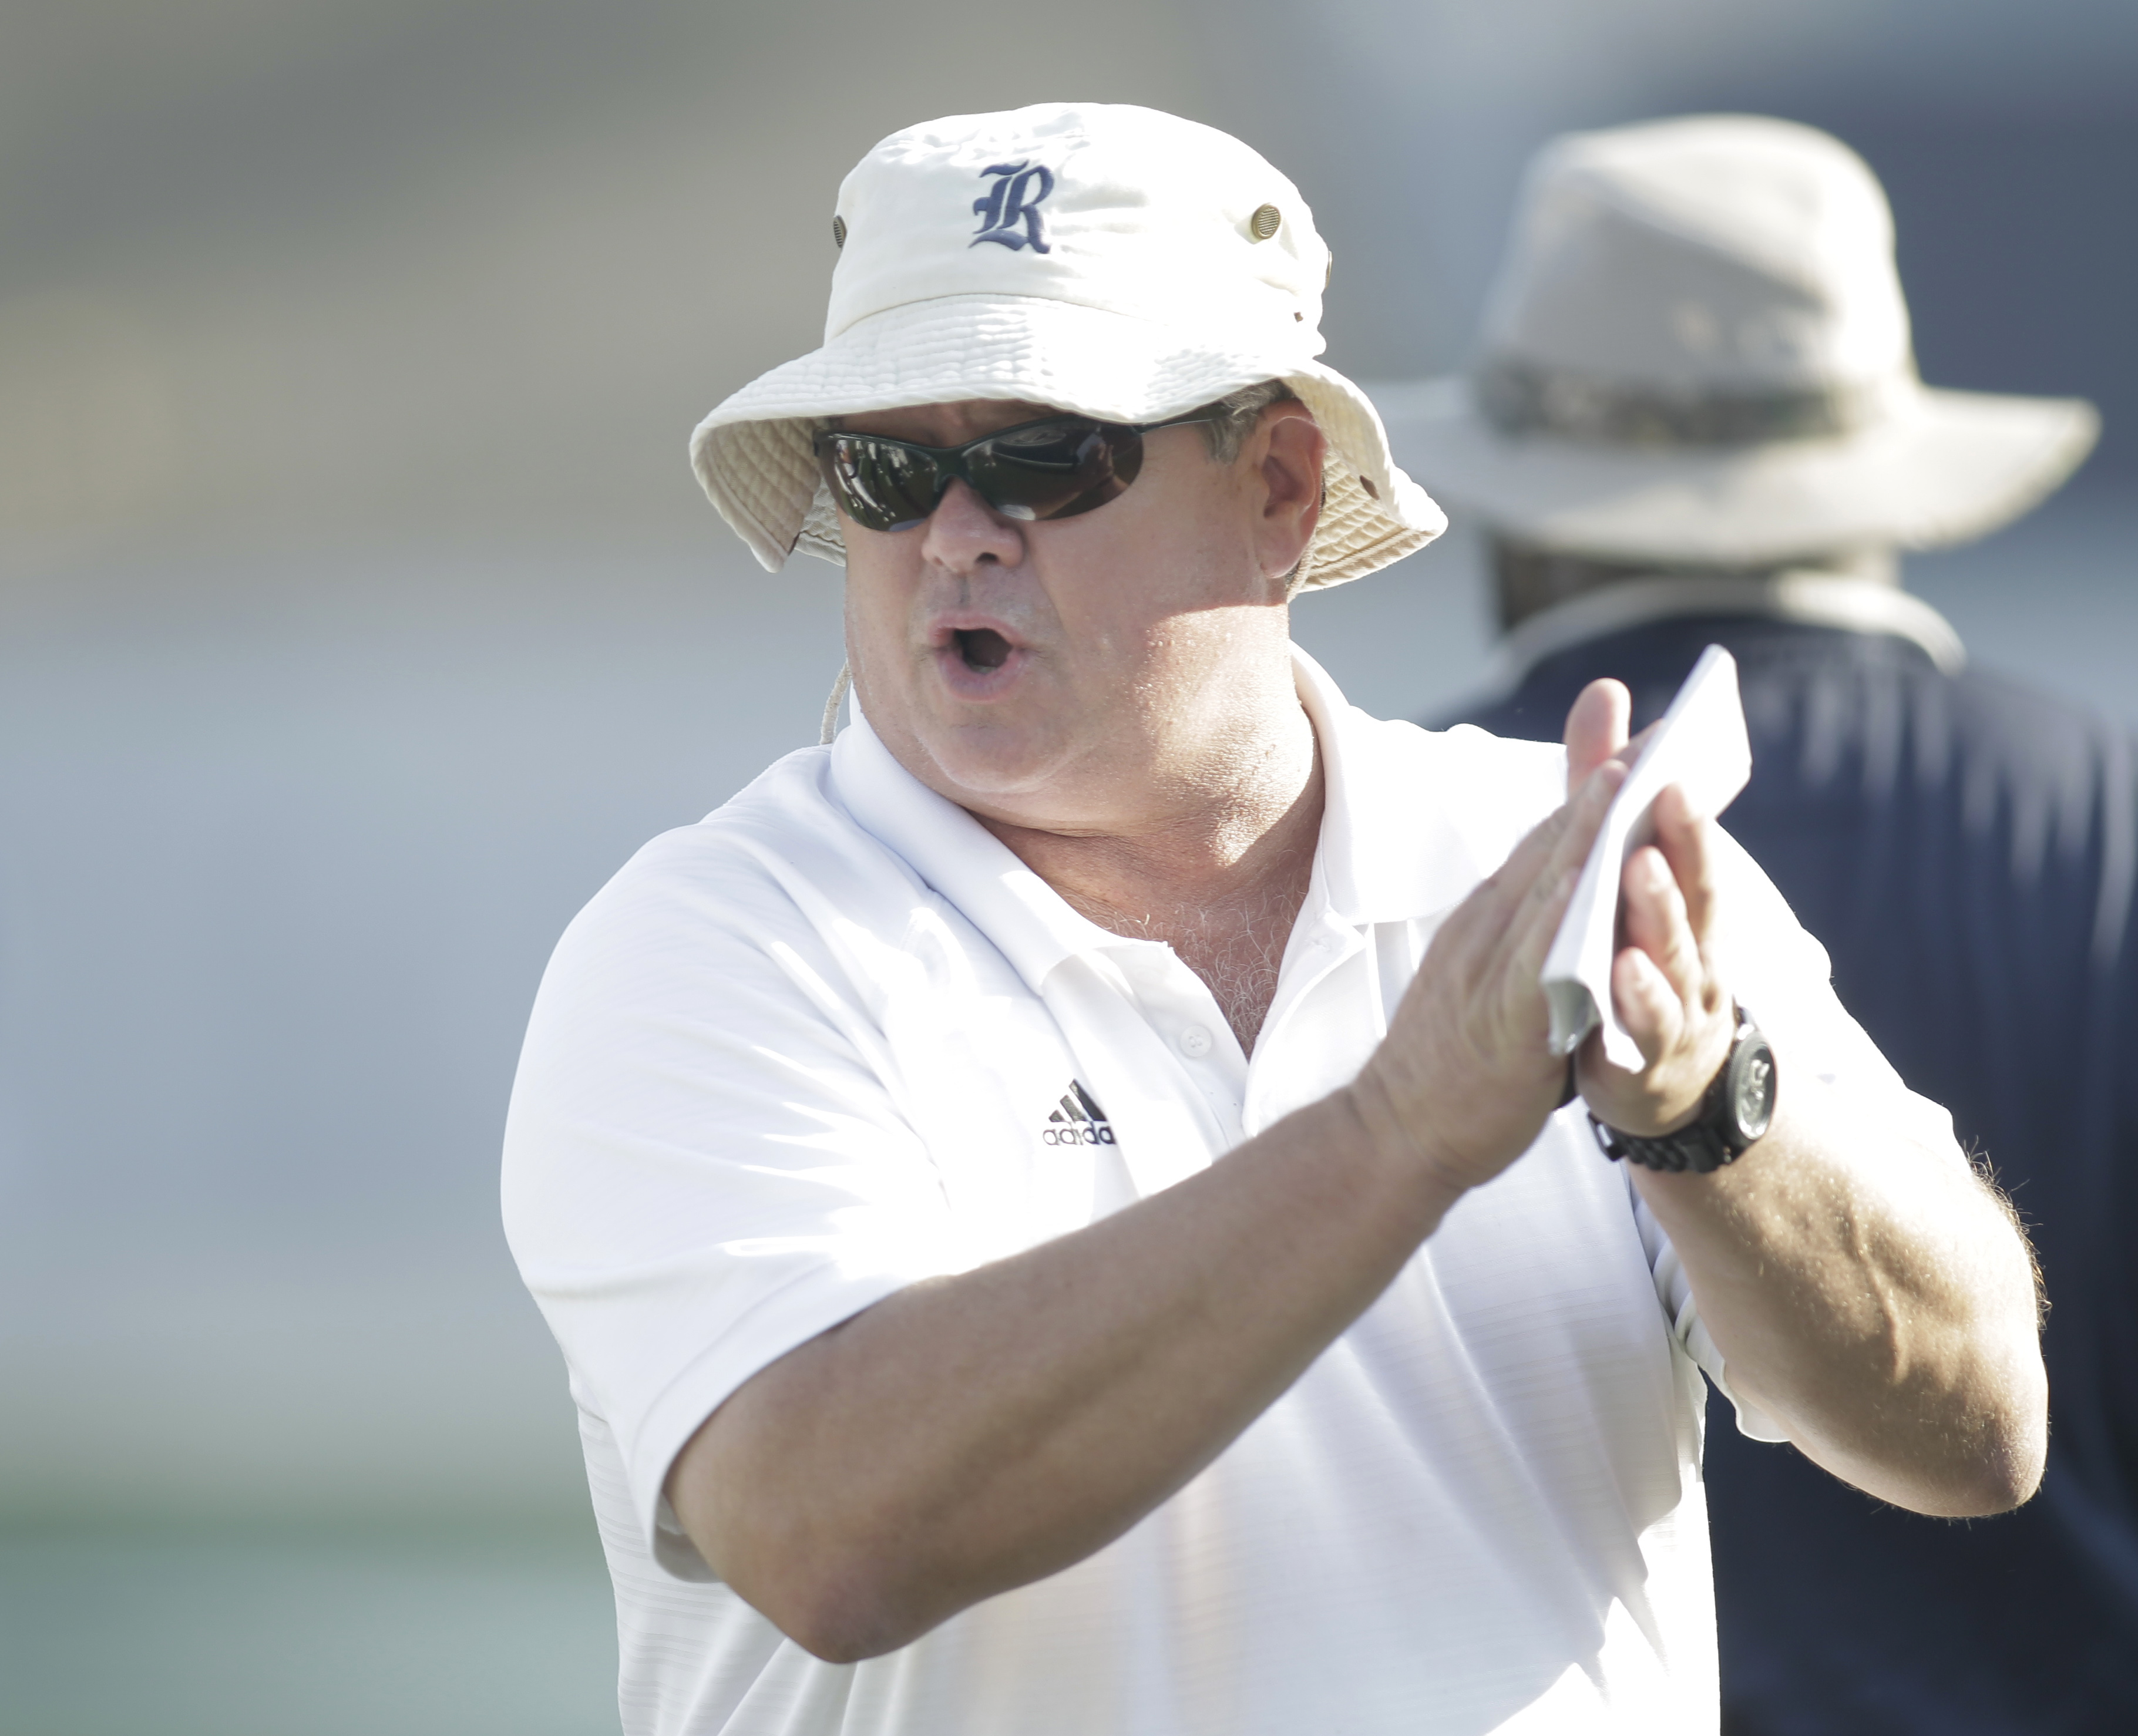 In more than one way, coach David Bailiff has supreme confidence in his players at Rice. (Erich Schlegel / USA TODAY Sports)